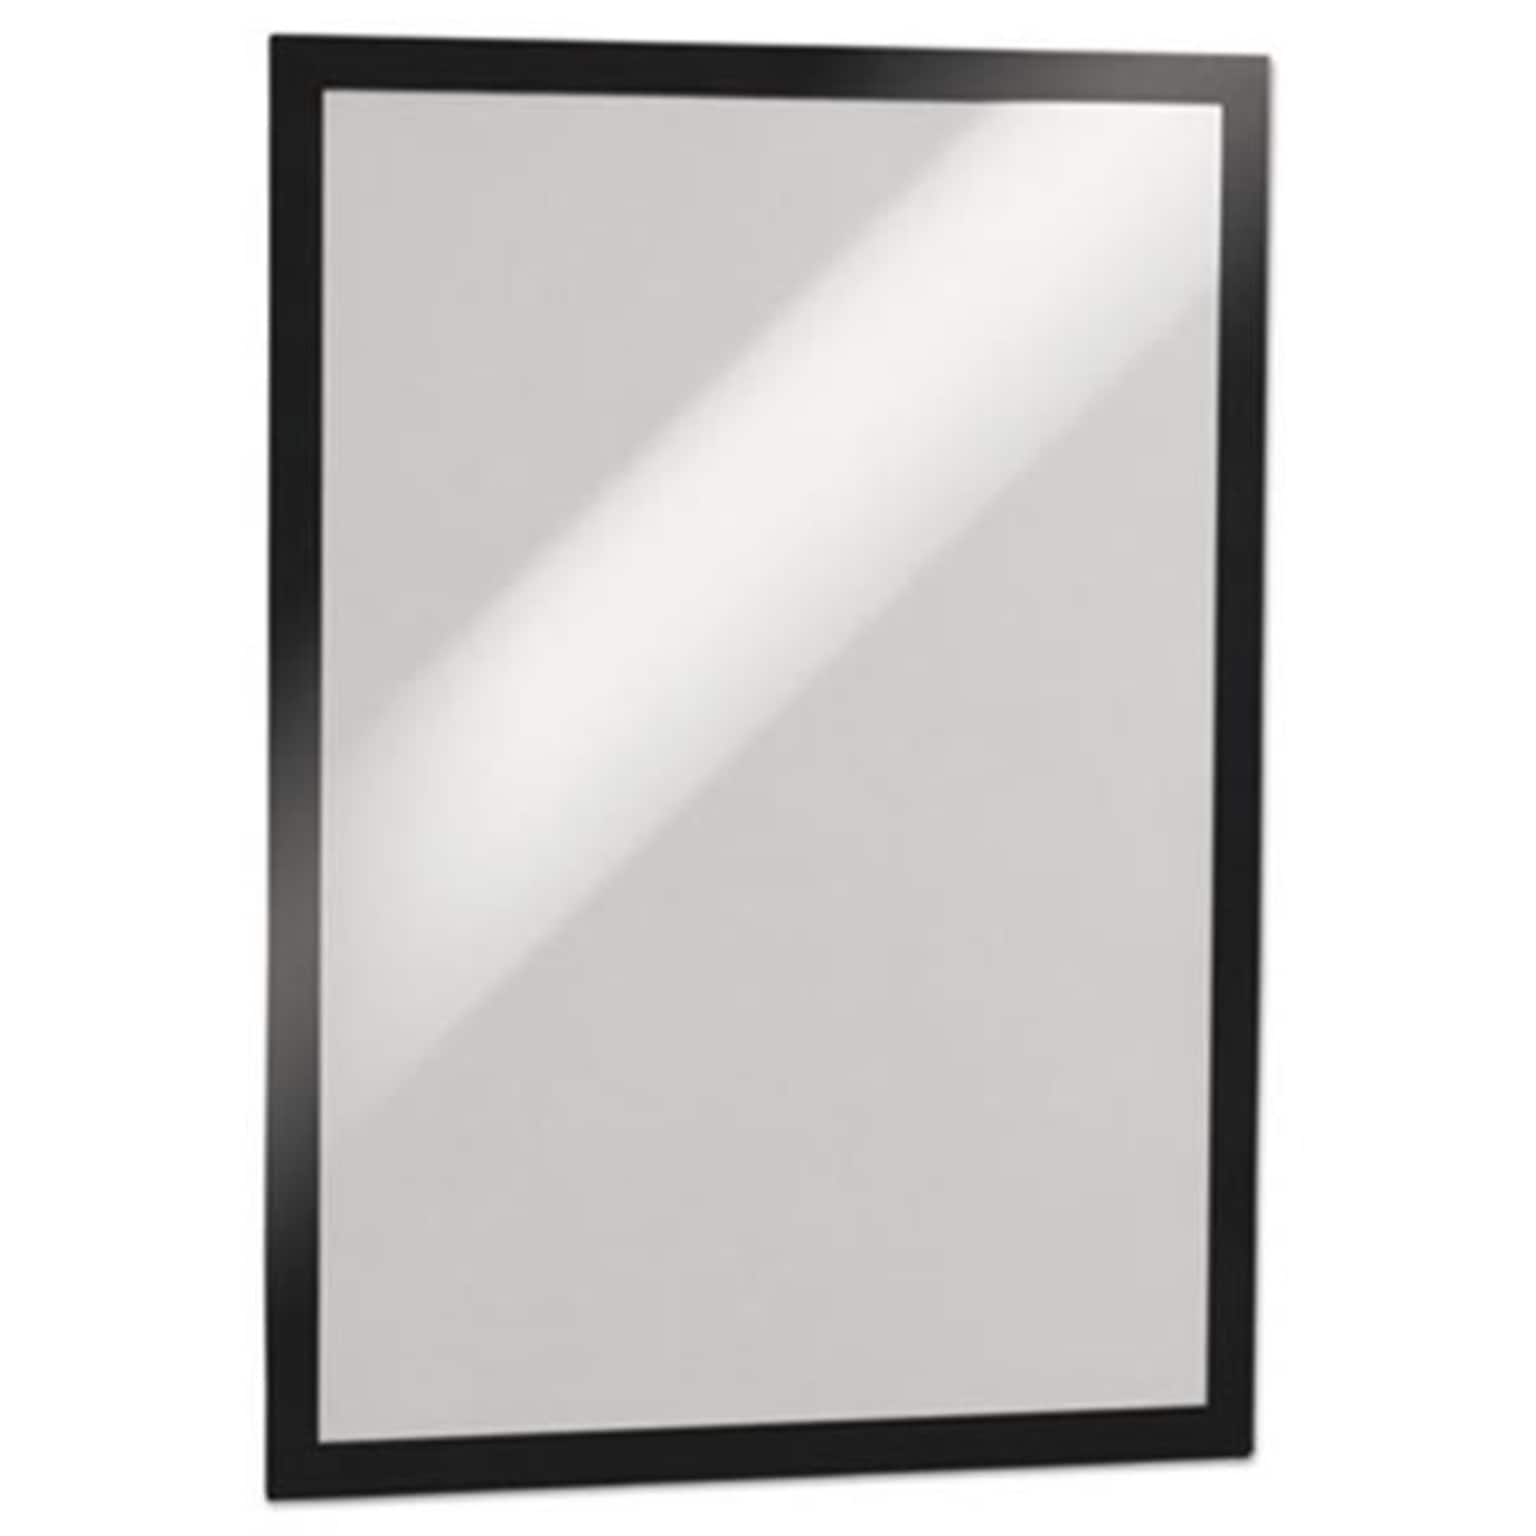 Durable Office Products 11 x 17 Duraframe Sign Holder, Black Frame (SSN2983)